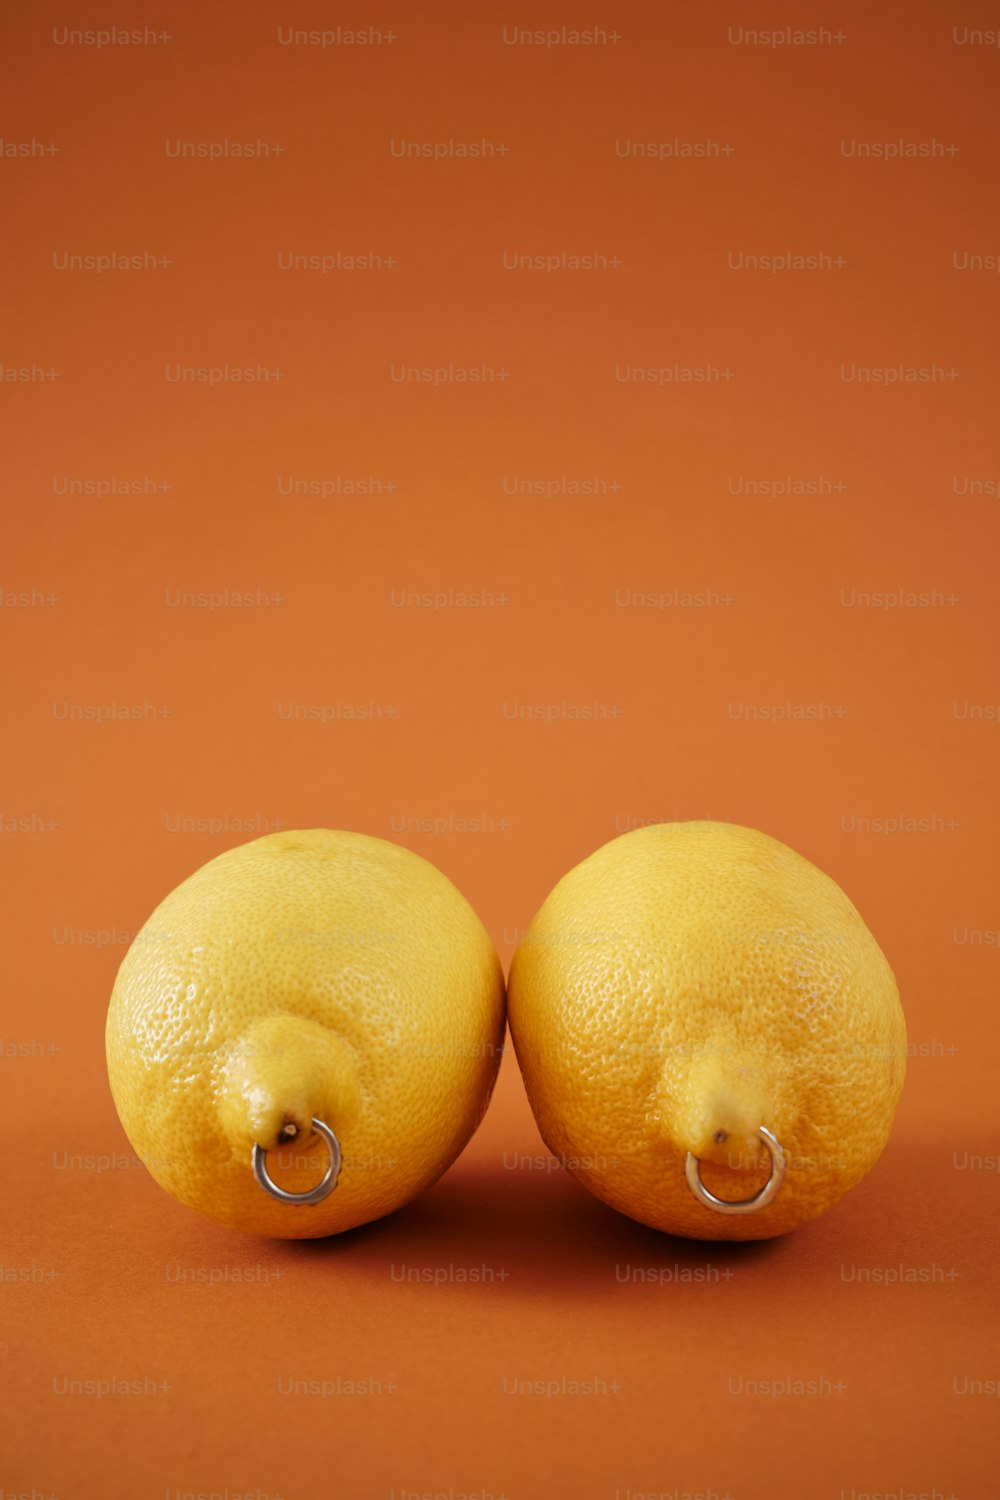 two lemons sitting next to each other on a table